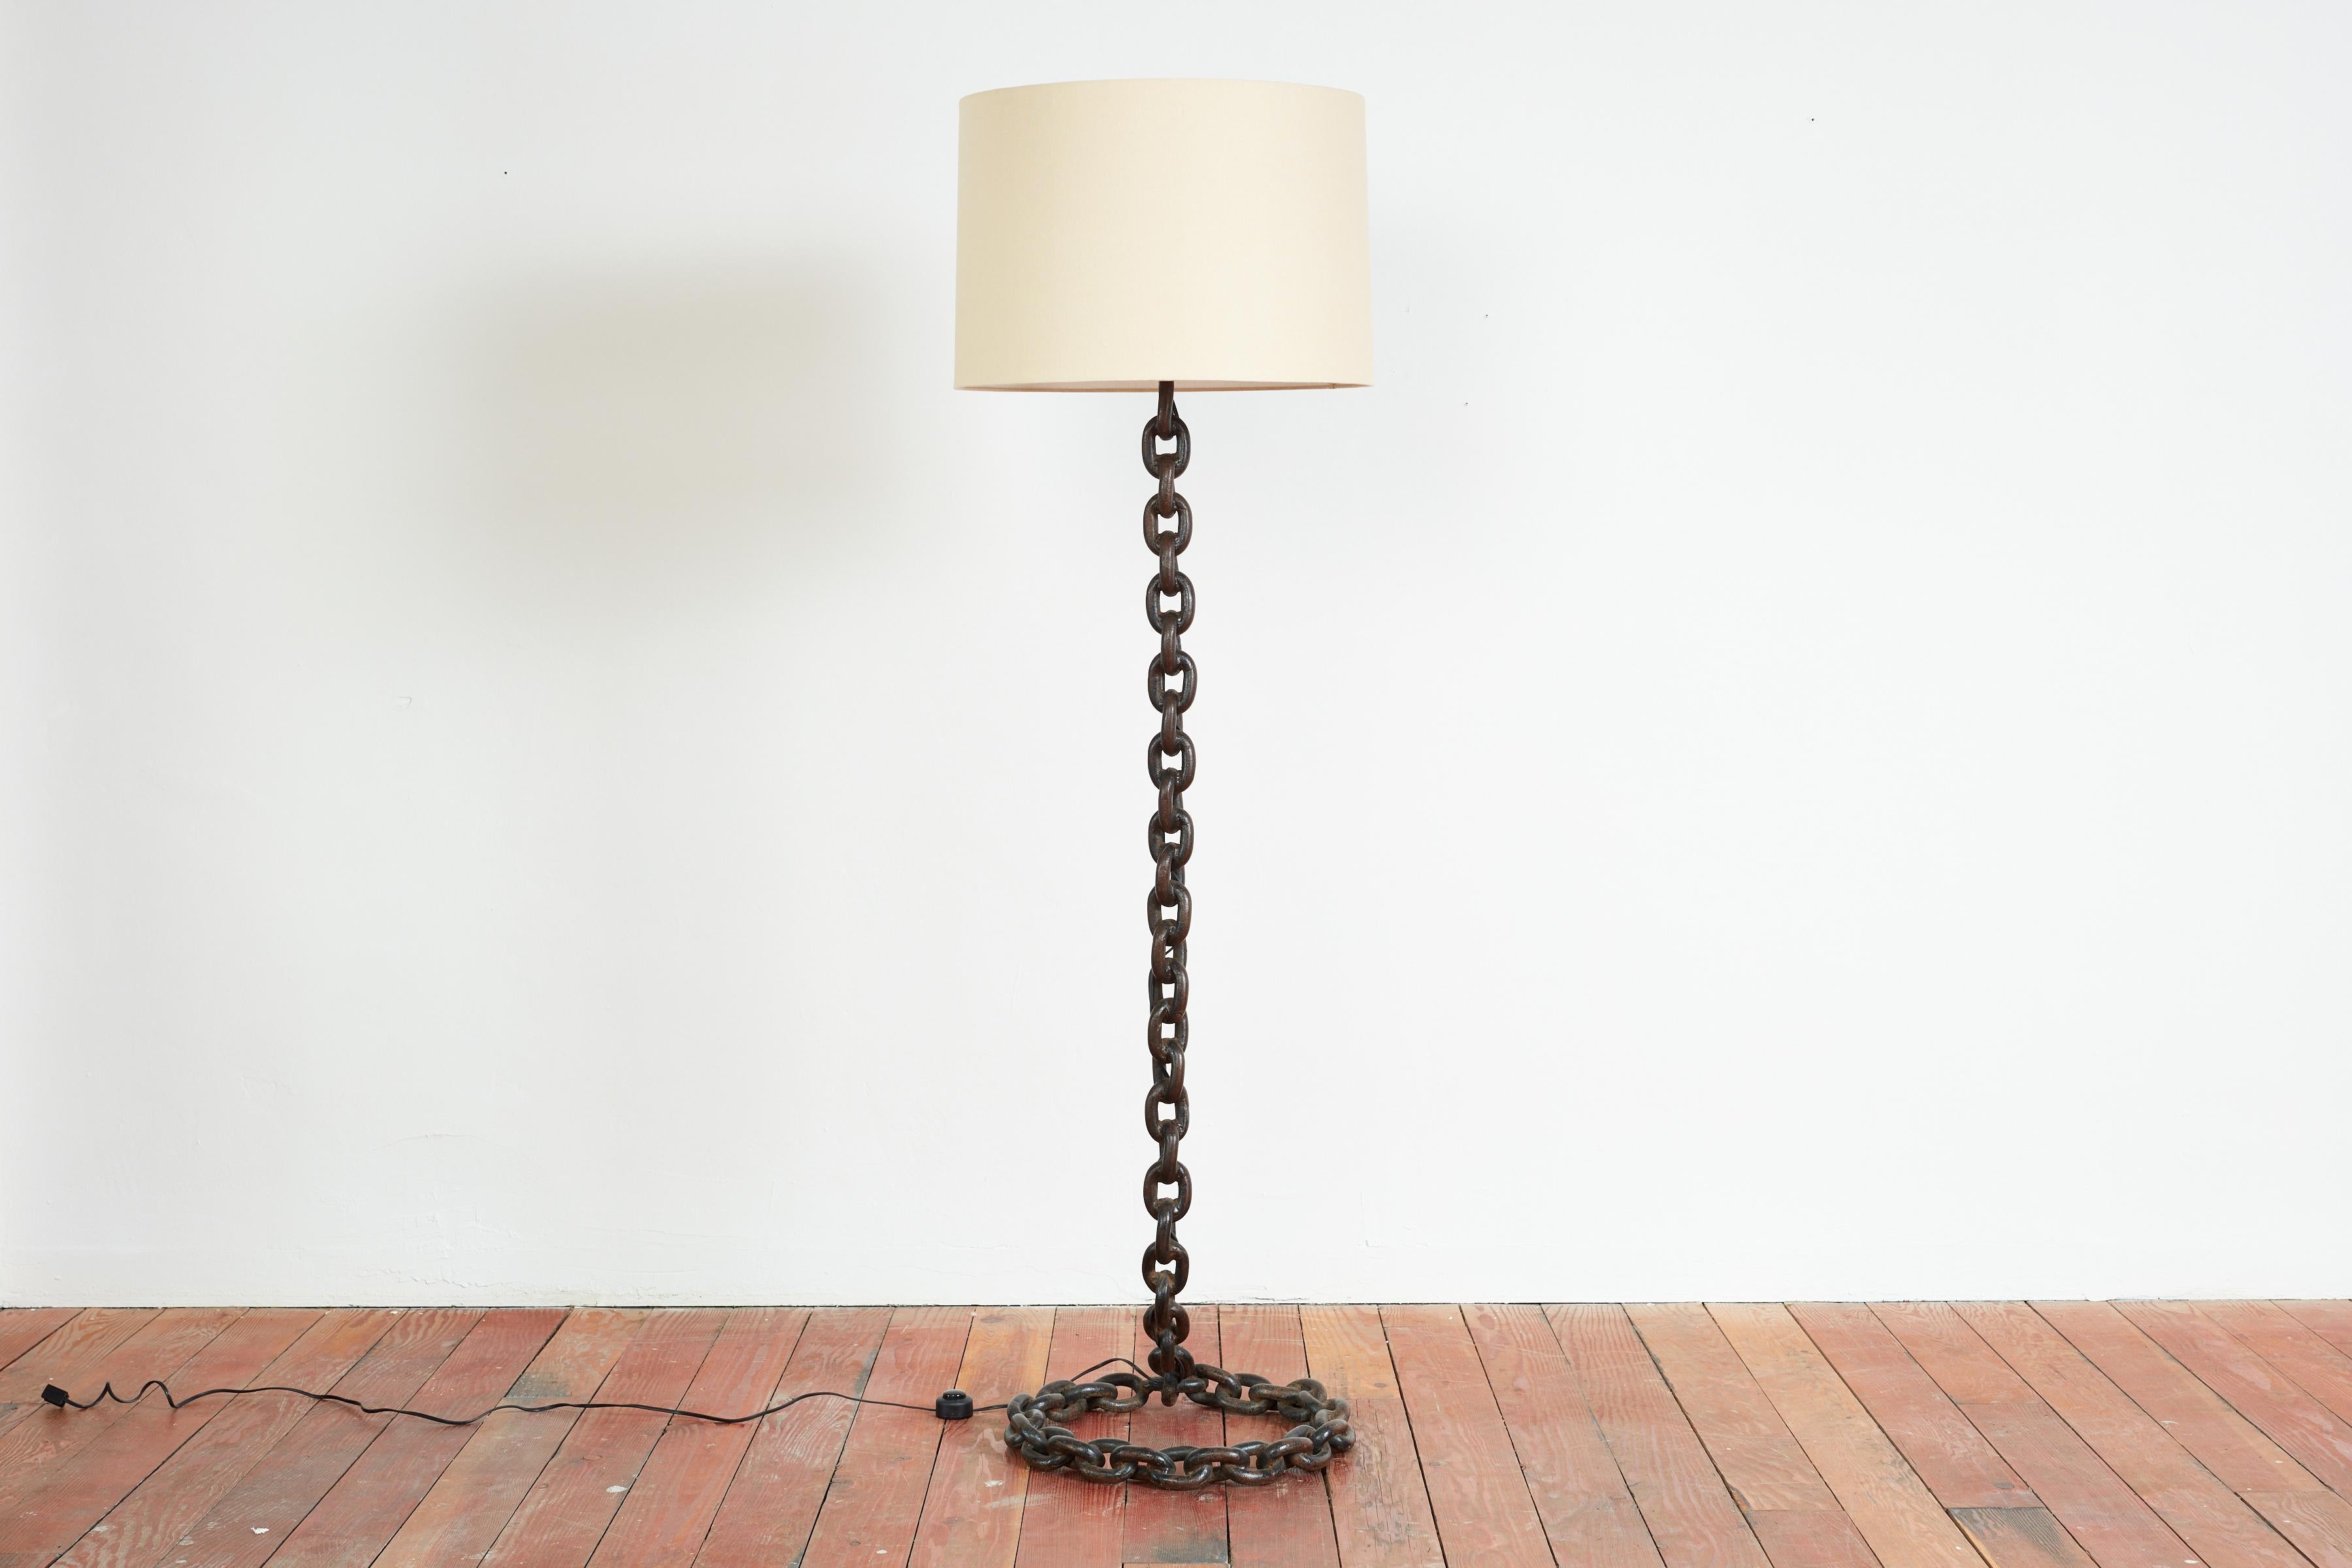 Incredible heavy chainlink floor lamp, France circa 1950s
Extremely well made with circular base and welded in matte black. 
In the style of Franz West 
New silk shade

BRUTALIST IRON CHAIN LINK FLOOR LAMP, MADE IN 1960S FRANCE. JUST OVER 5 FEET